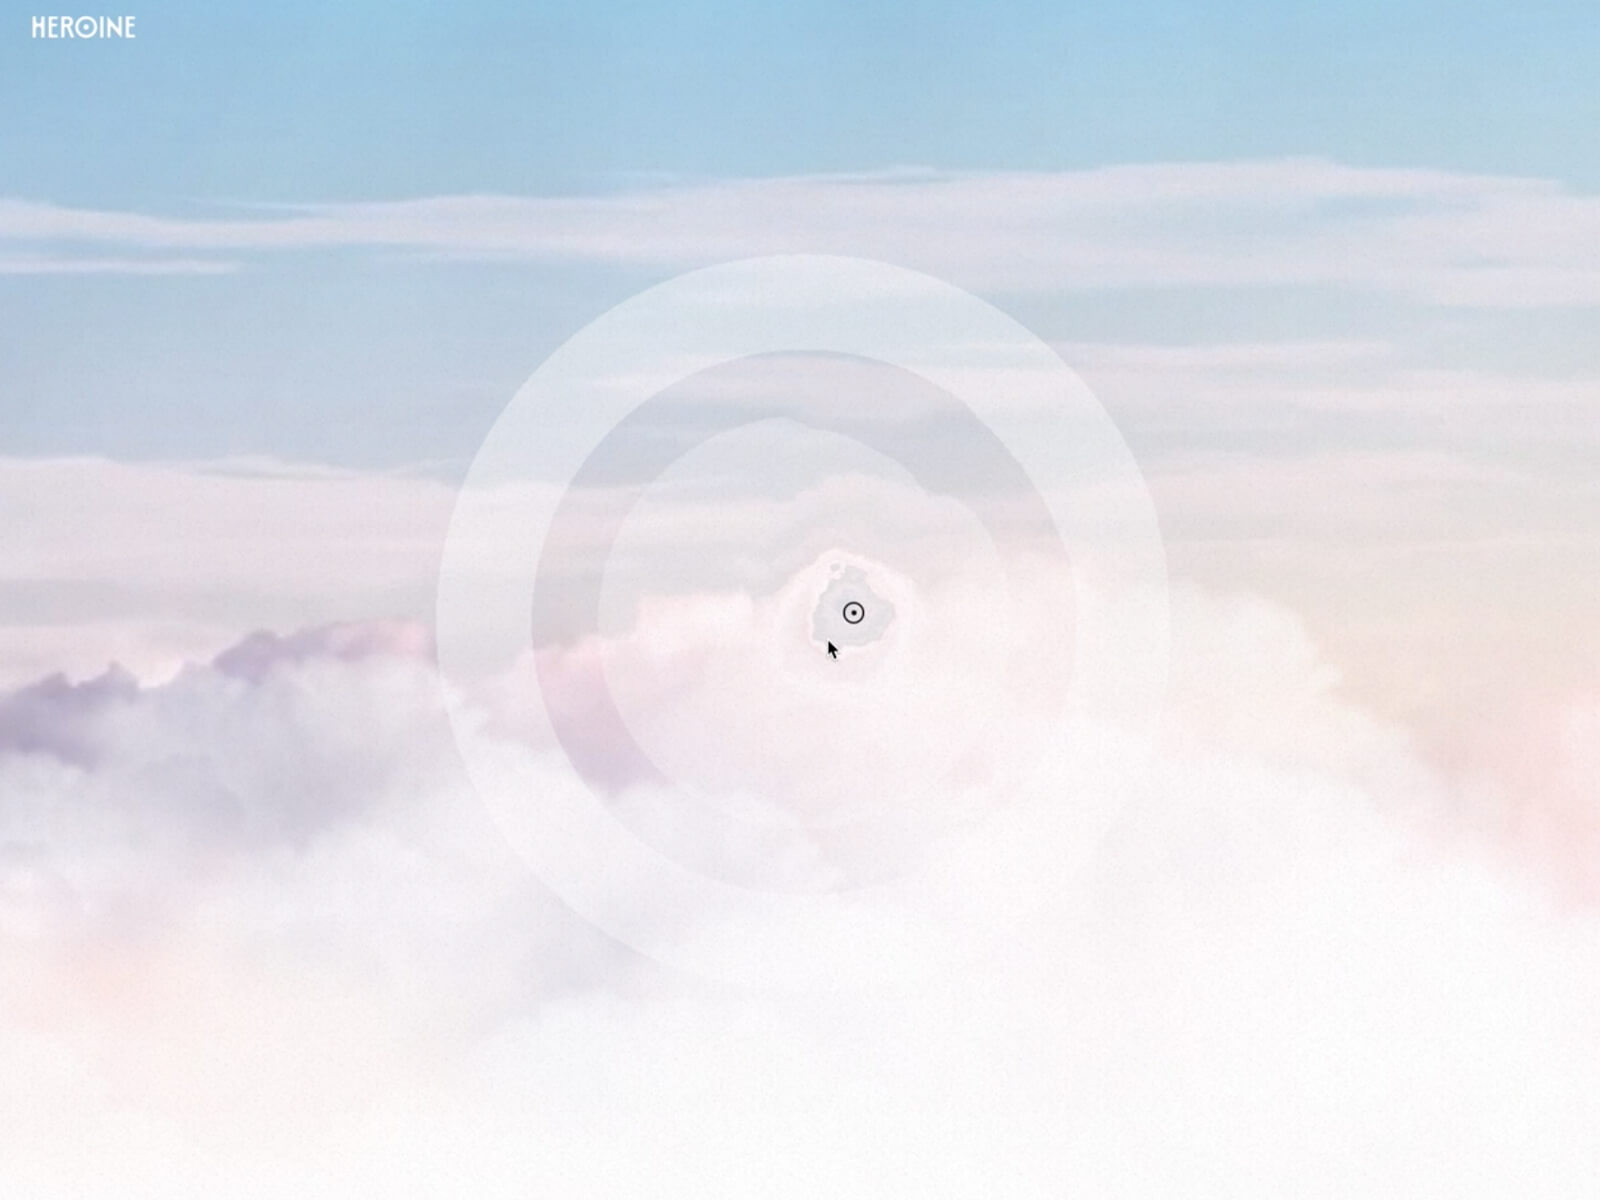 Flying through clouds intro animation